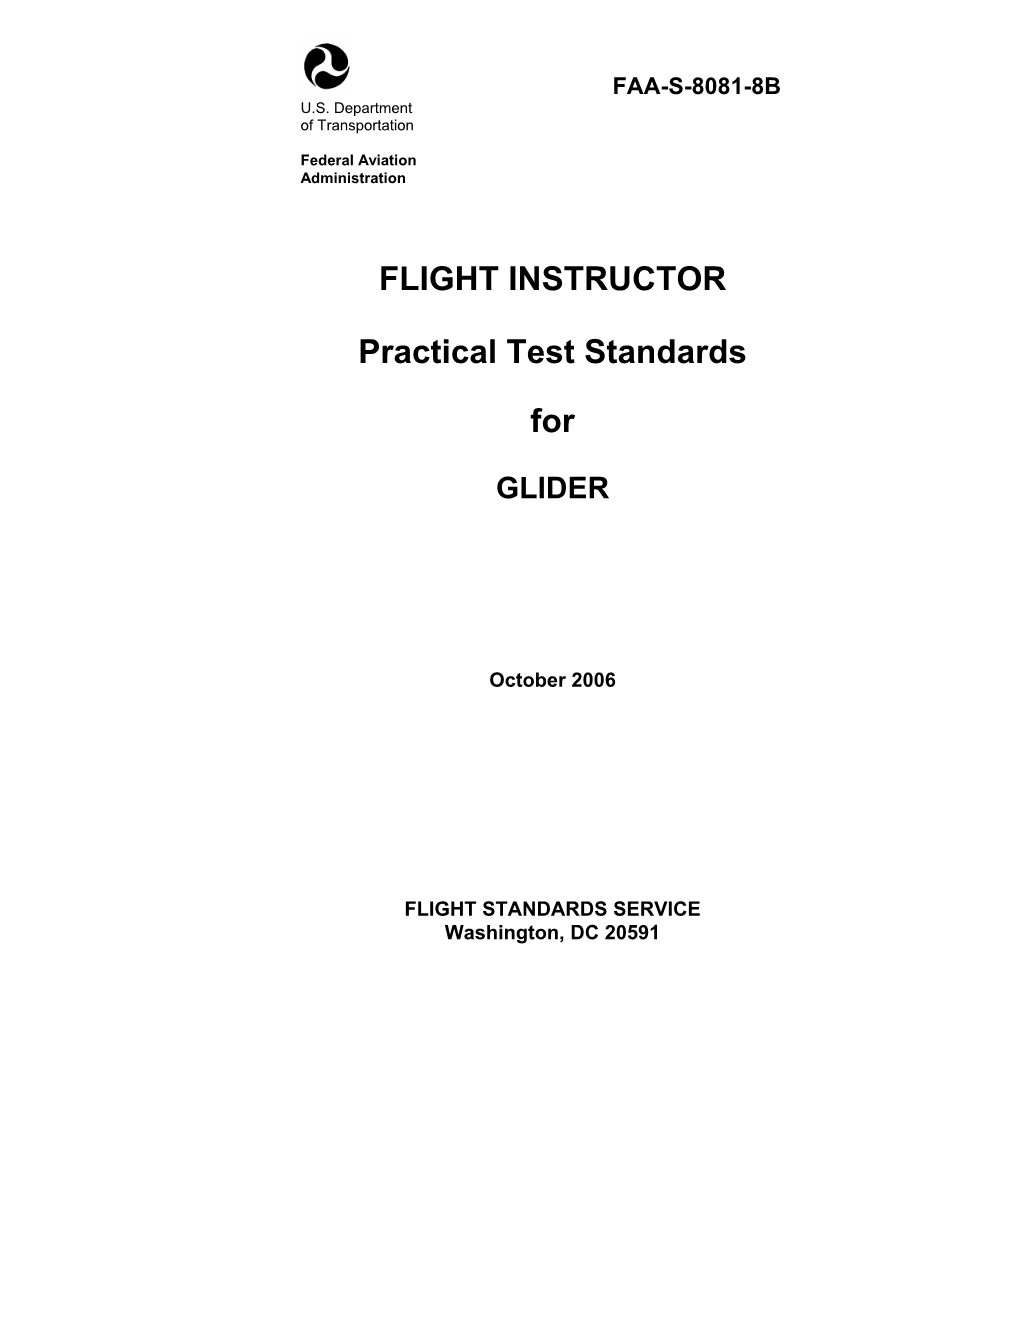 FAA-S-8081-8B, Flight Instructor Practical Test Standards for Glider